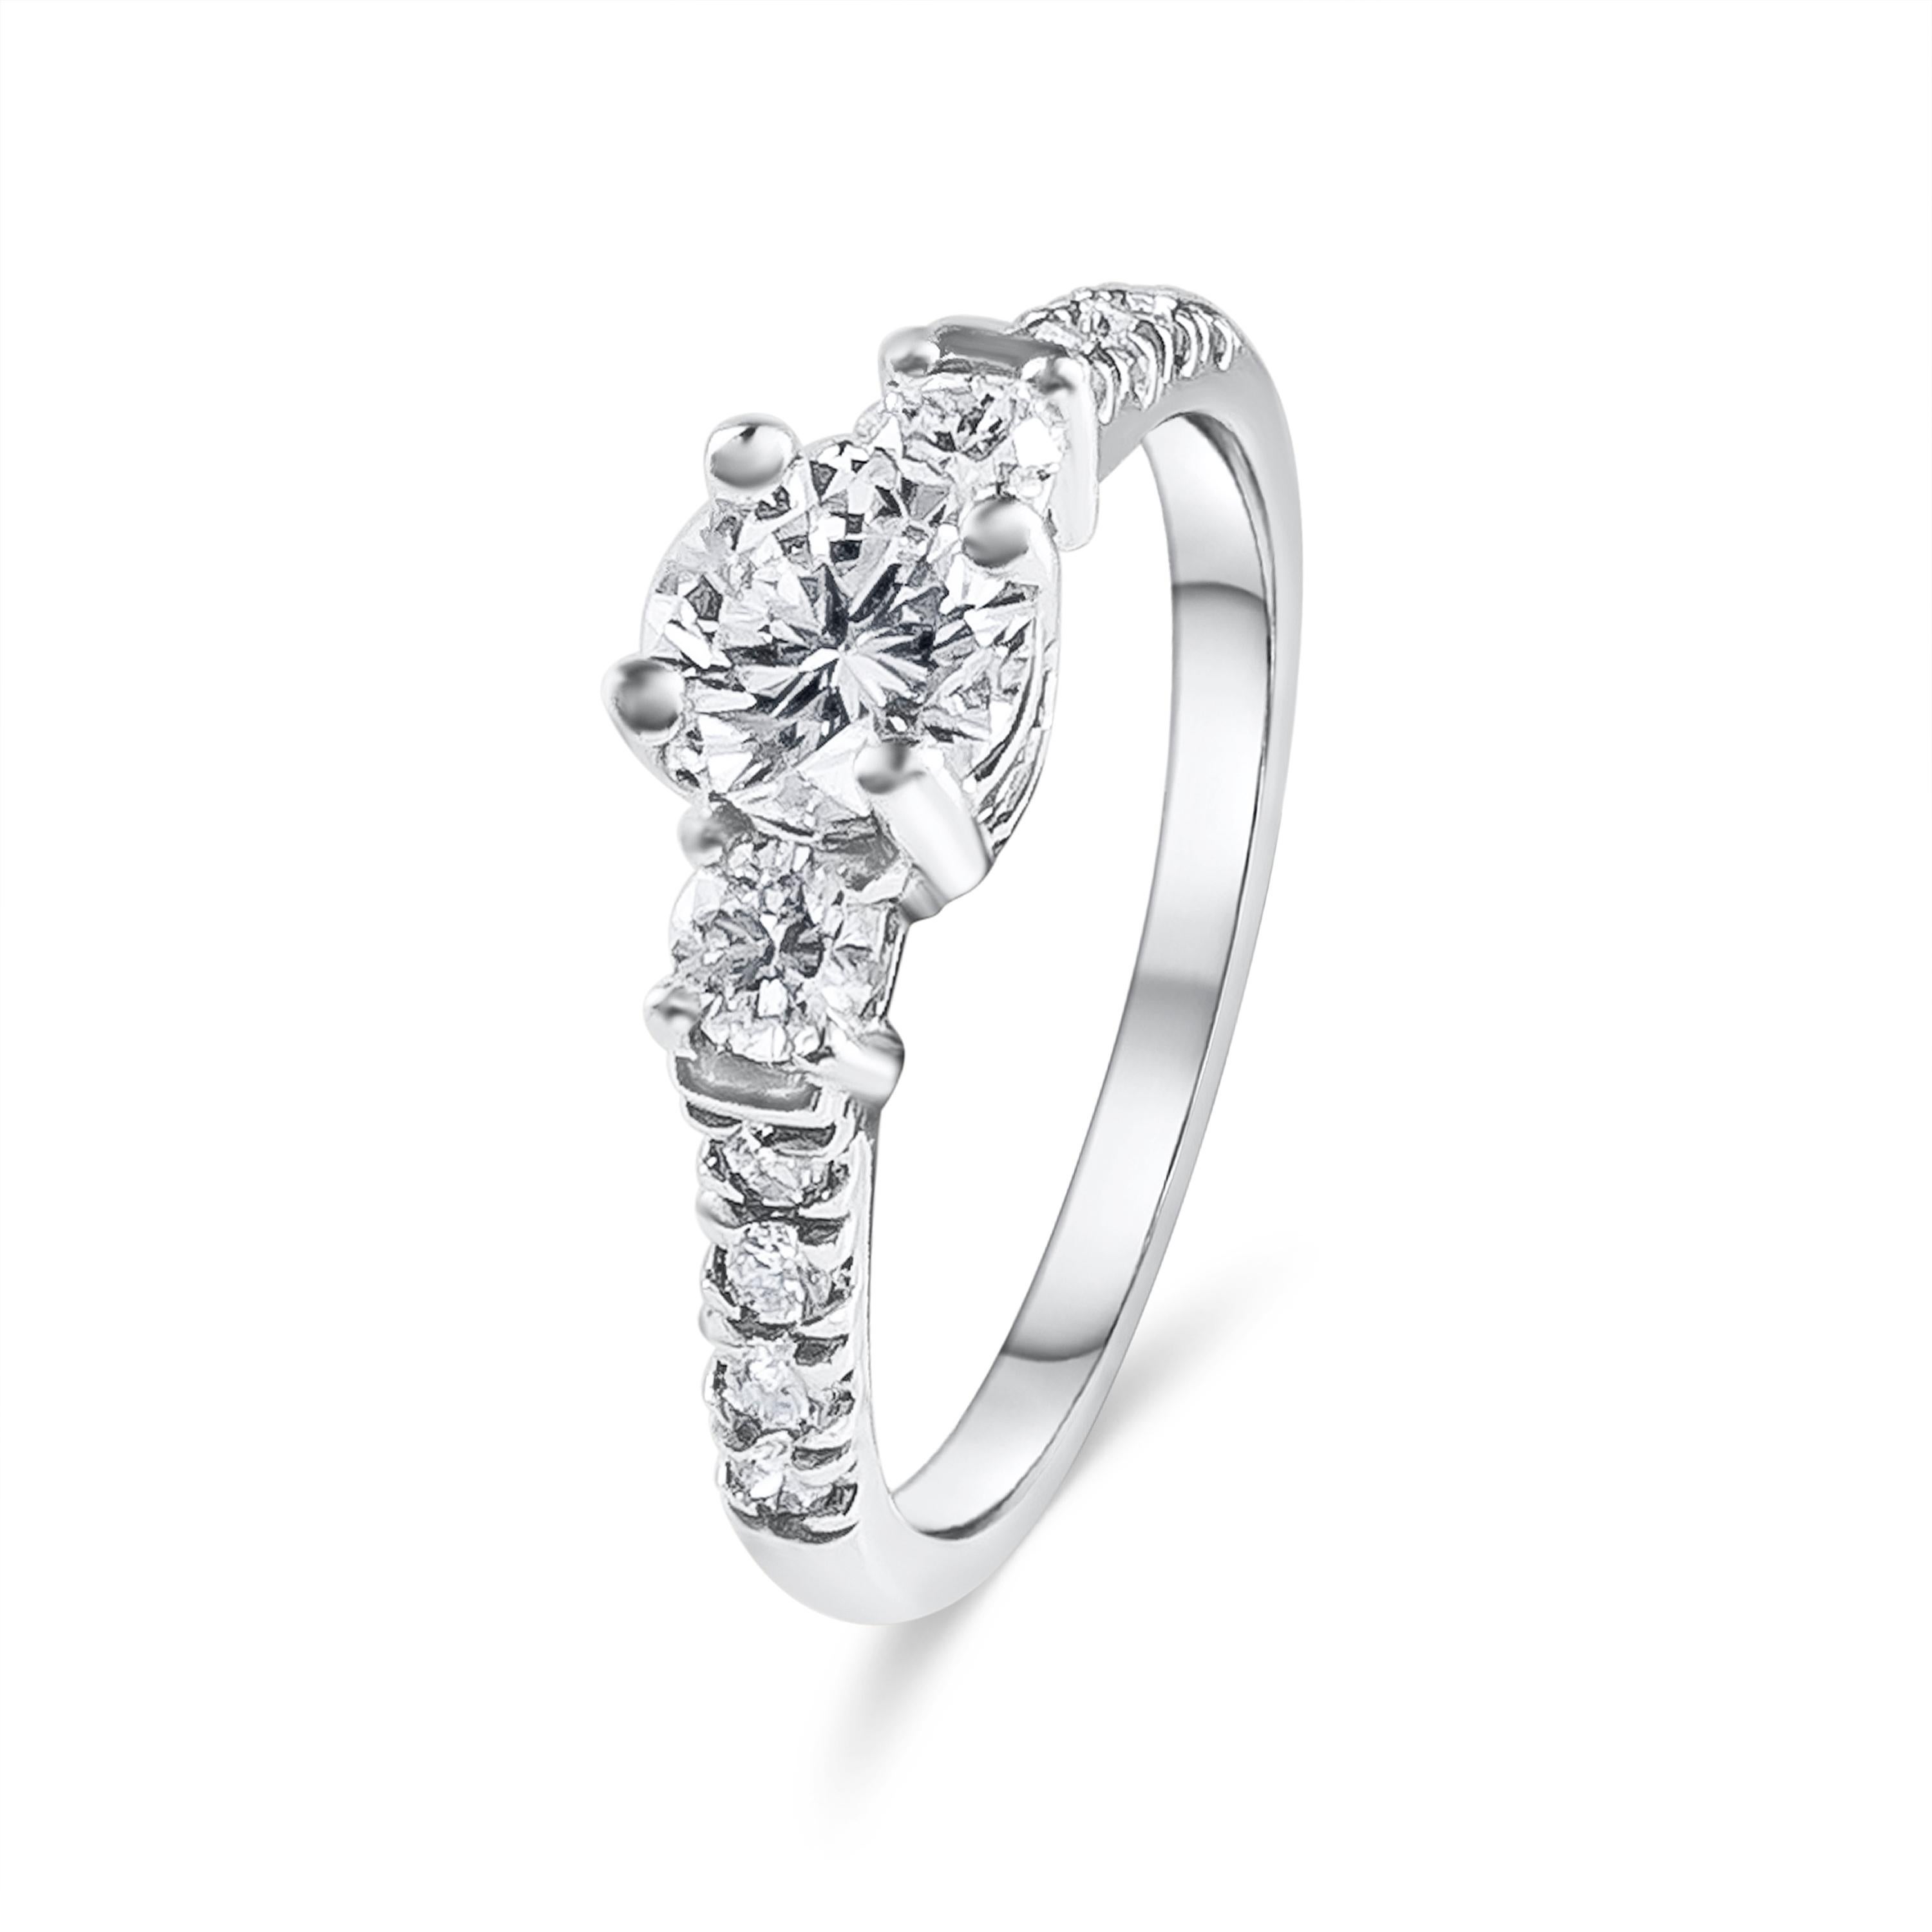 A lustrous engagement ring showcasing a 0.74 carat round brilliant diamond center that EGL USA Certified as H color, VS1 clarity. The center is flanked by 2 smaller round diamonds weighing 0.34 carats. Set in a polished platinum basket and band